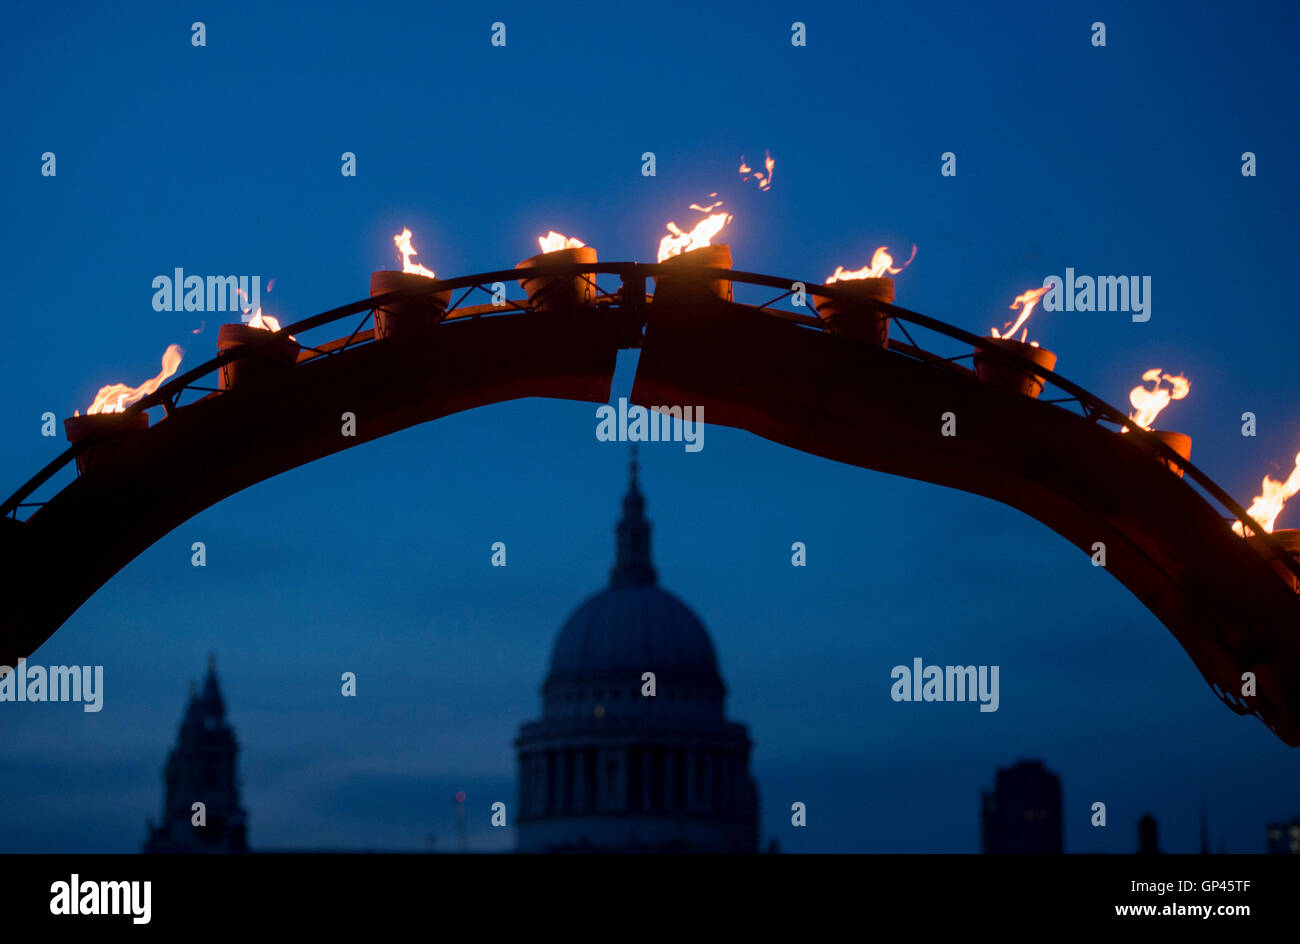 A structure burns in front of St Paul's Cathedral as part of 'Fire Garden' by Compagnie Carabosse, in front of the Tate Modern in London to mark the 350th anniversary of the Great Fire of London. Stock Photo